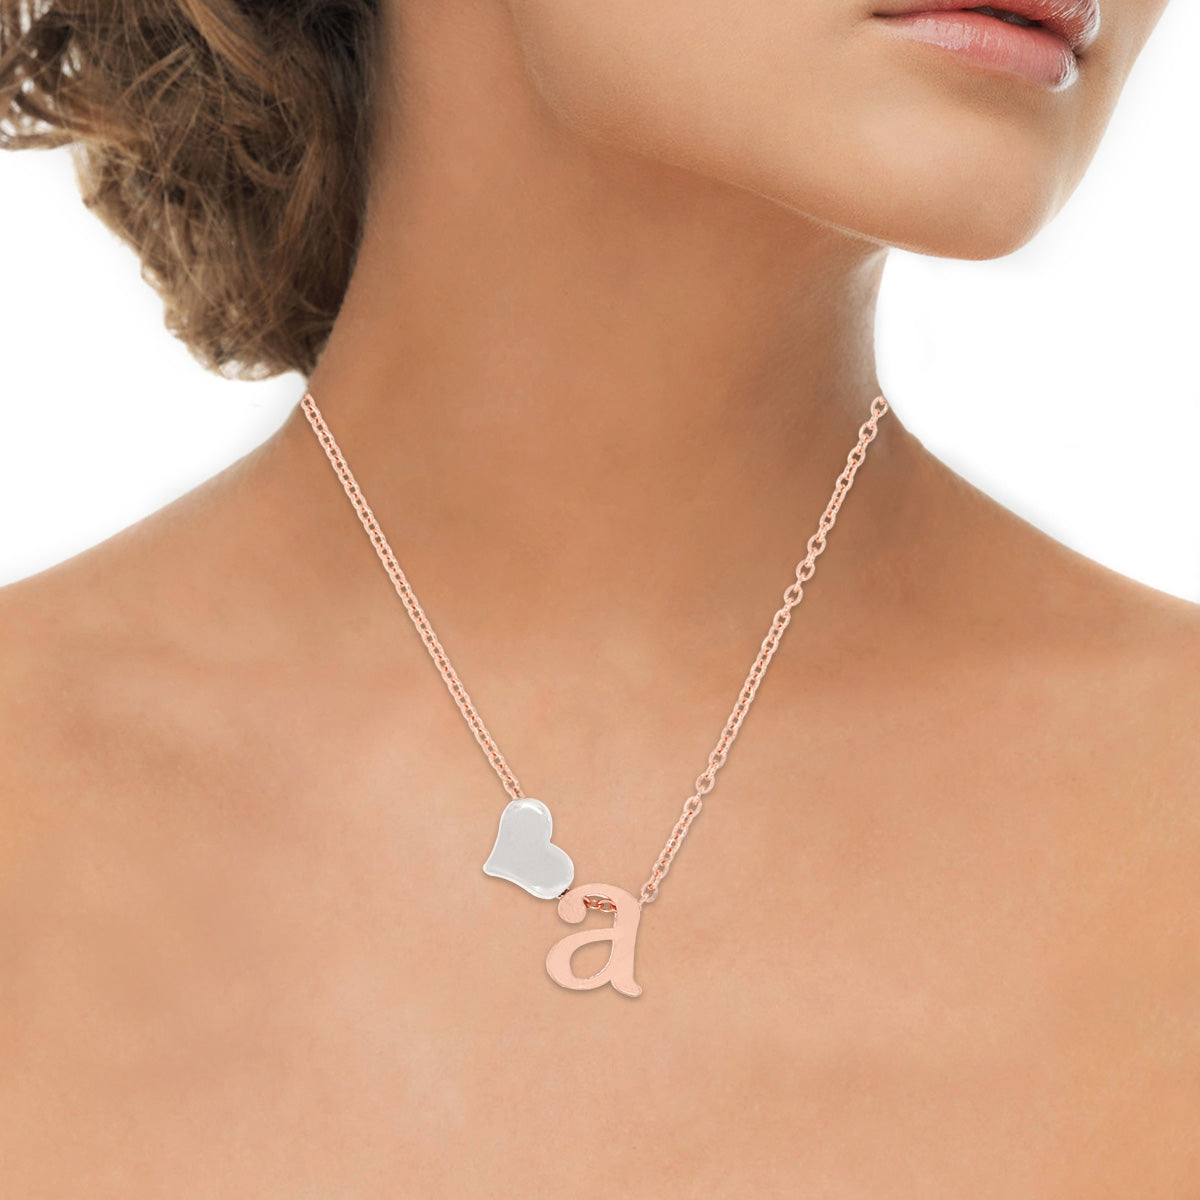 Loving A  Alphabet Rose Gold Pendant with Link Chain